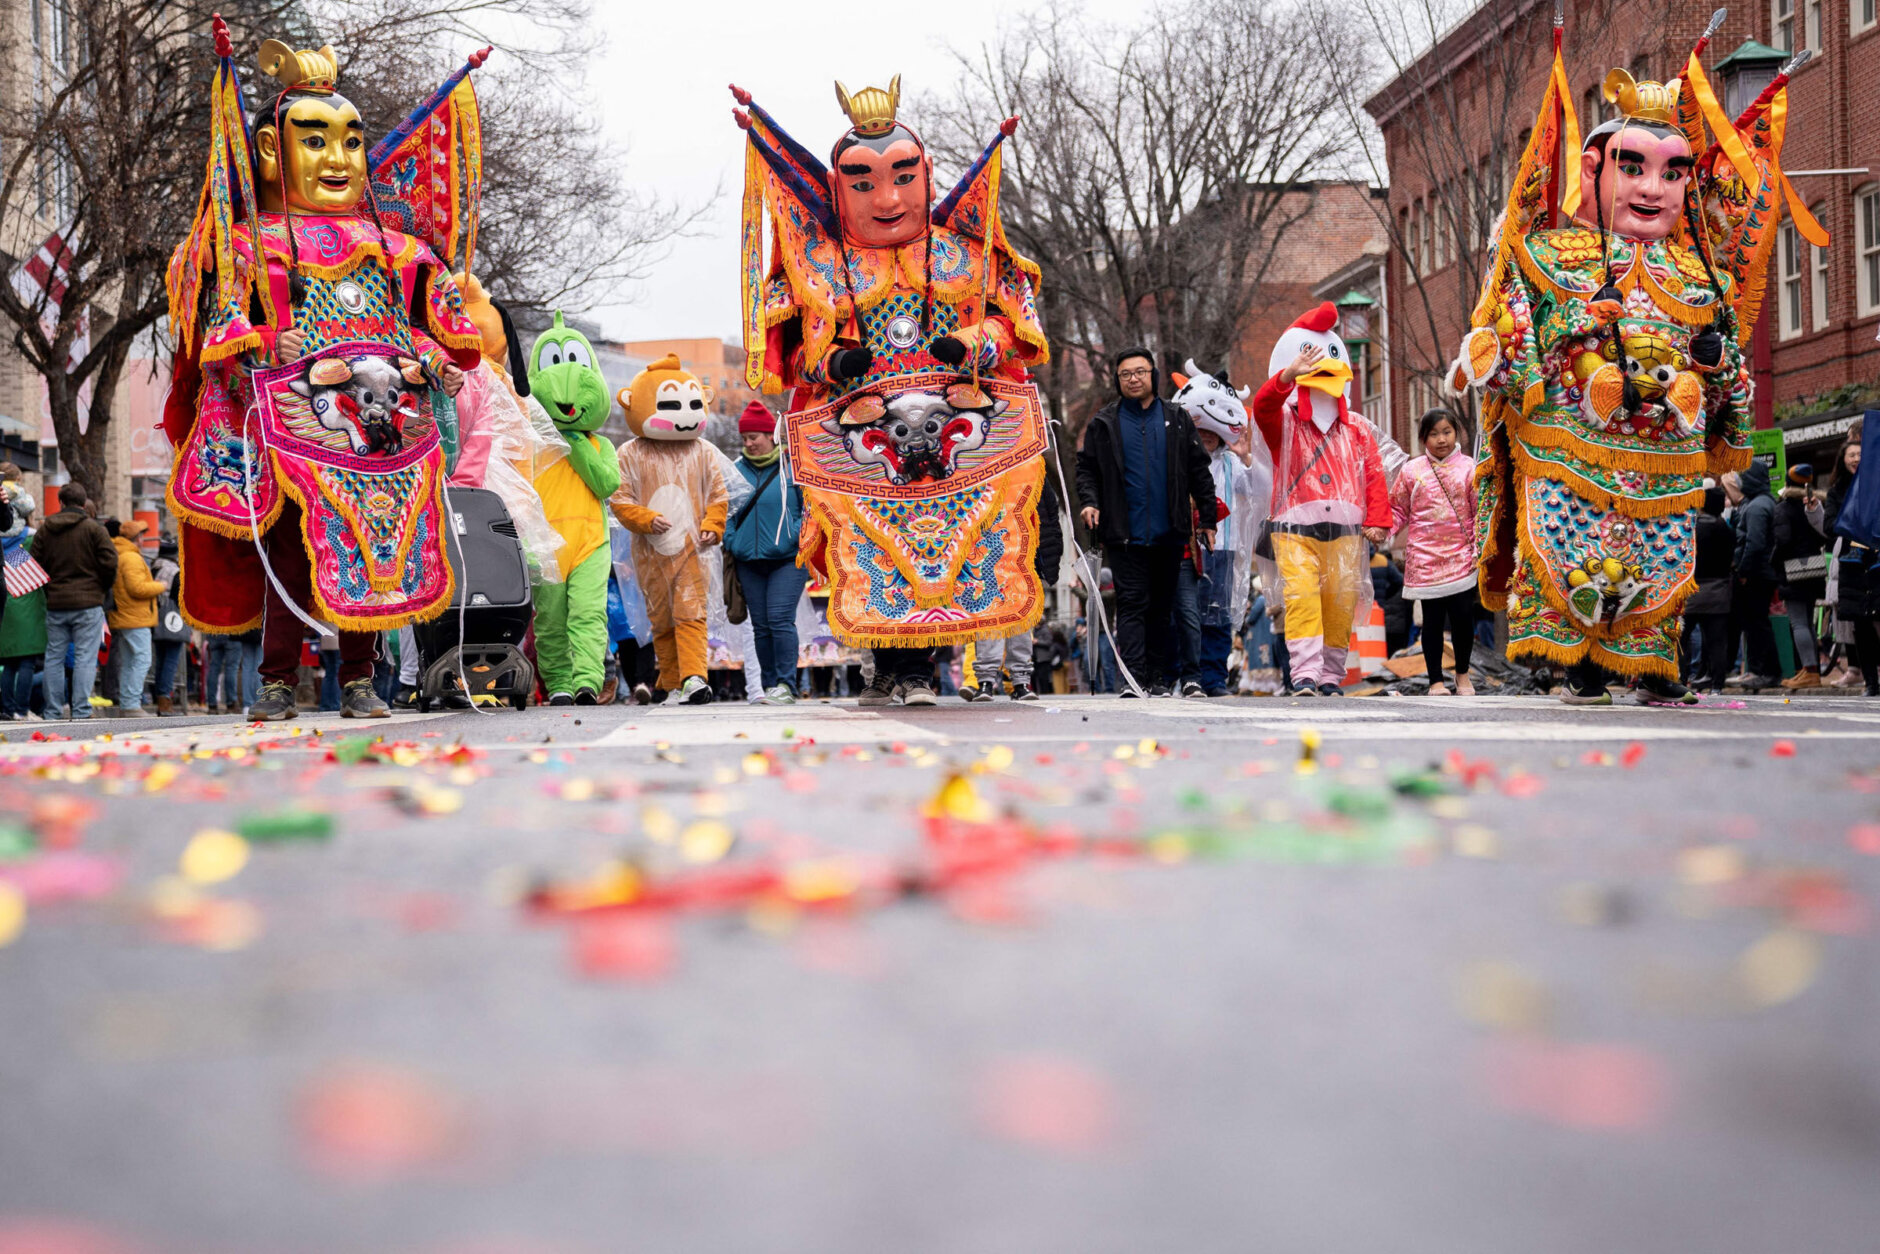 Participants march during the Lunar New Year Parade in the Chinatown neighborhood of Washington, DC, on January 22, 2023. - 2023 is the year of the rabbit in the Chinese horoscope. (Photo by Stefani Reynolds / AFP) (Photo by STEFANI REYNOLDS/AFP via Getty Images)